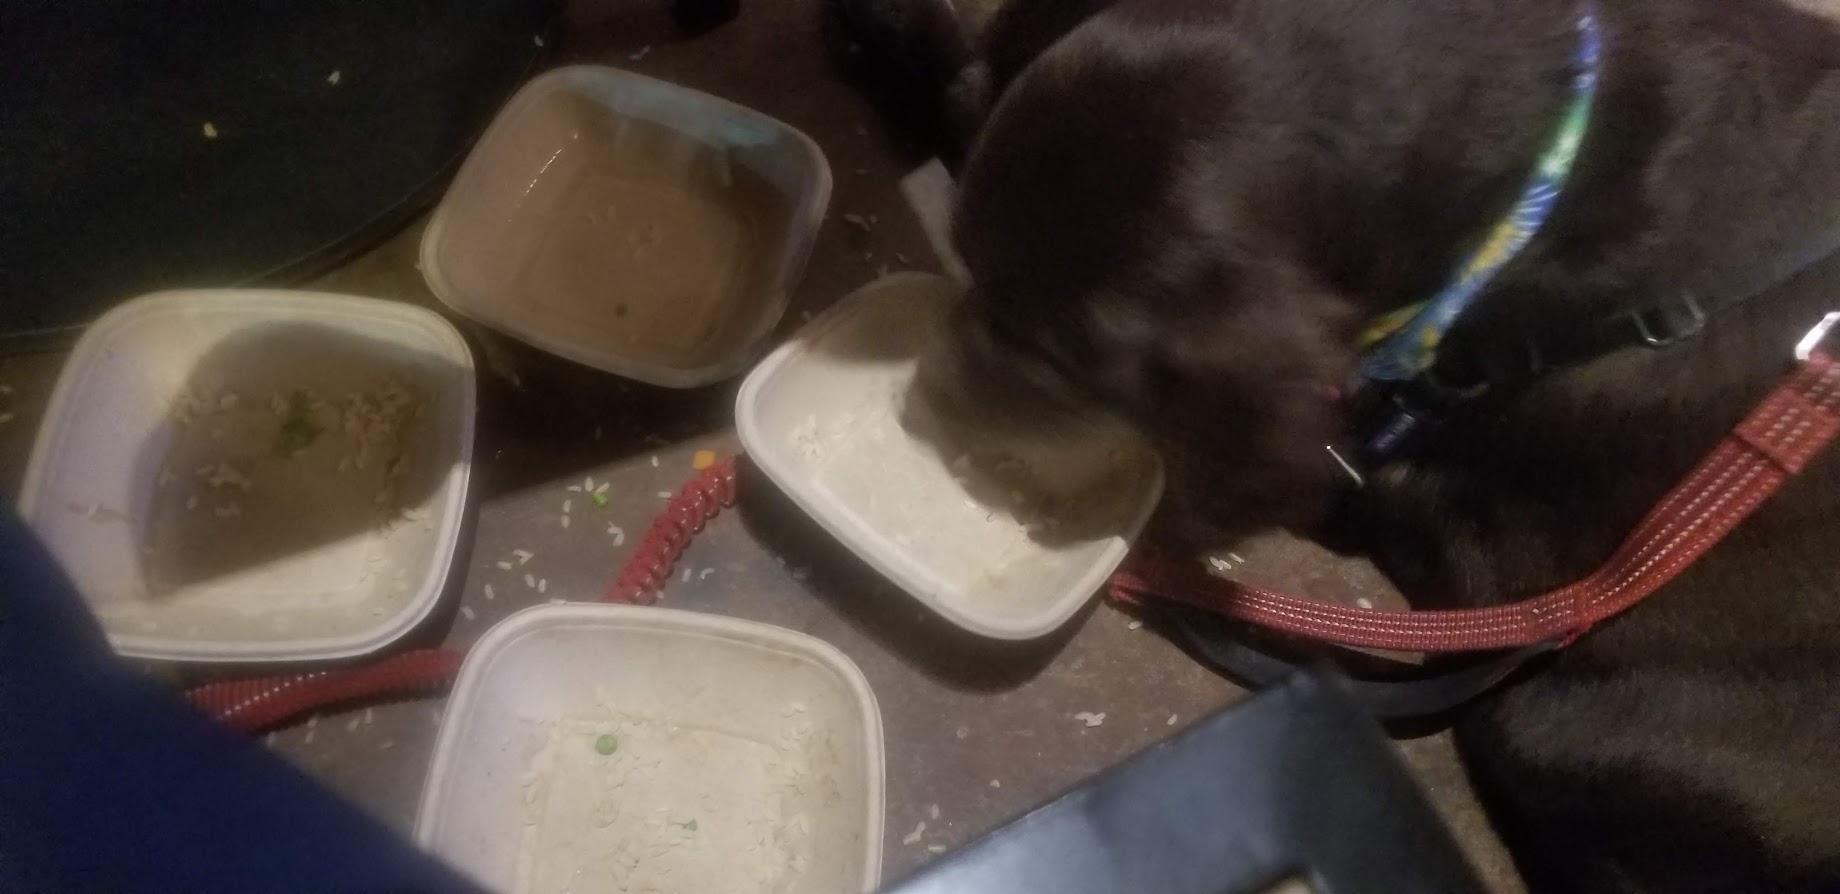 Hershey Making the Full Plate of Food Disappear